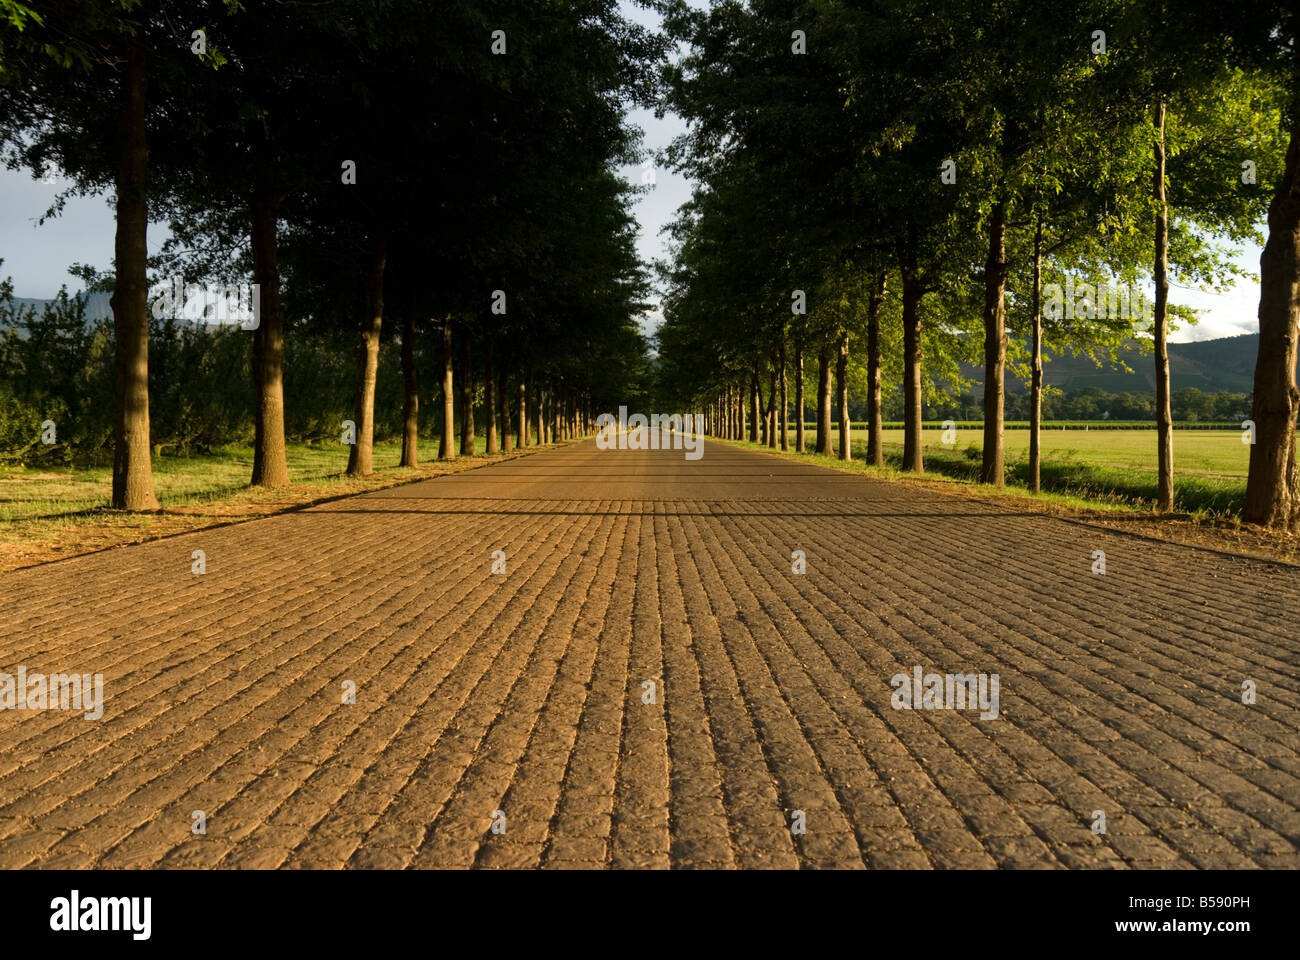 Tree lined paved road taken from a low angle with great perspective Stock Photo